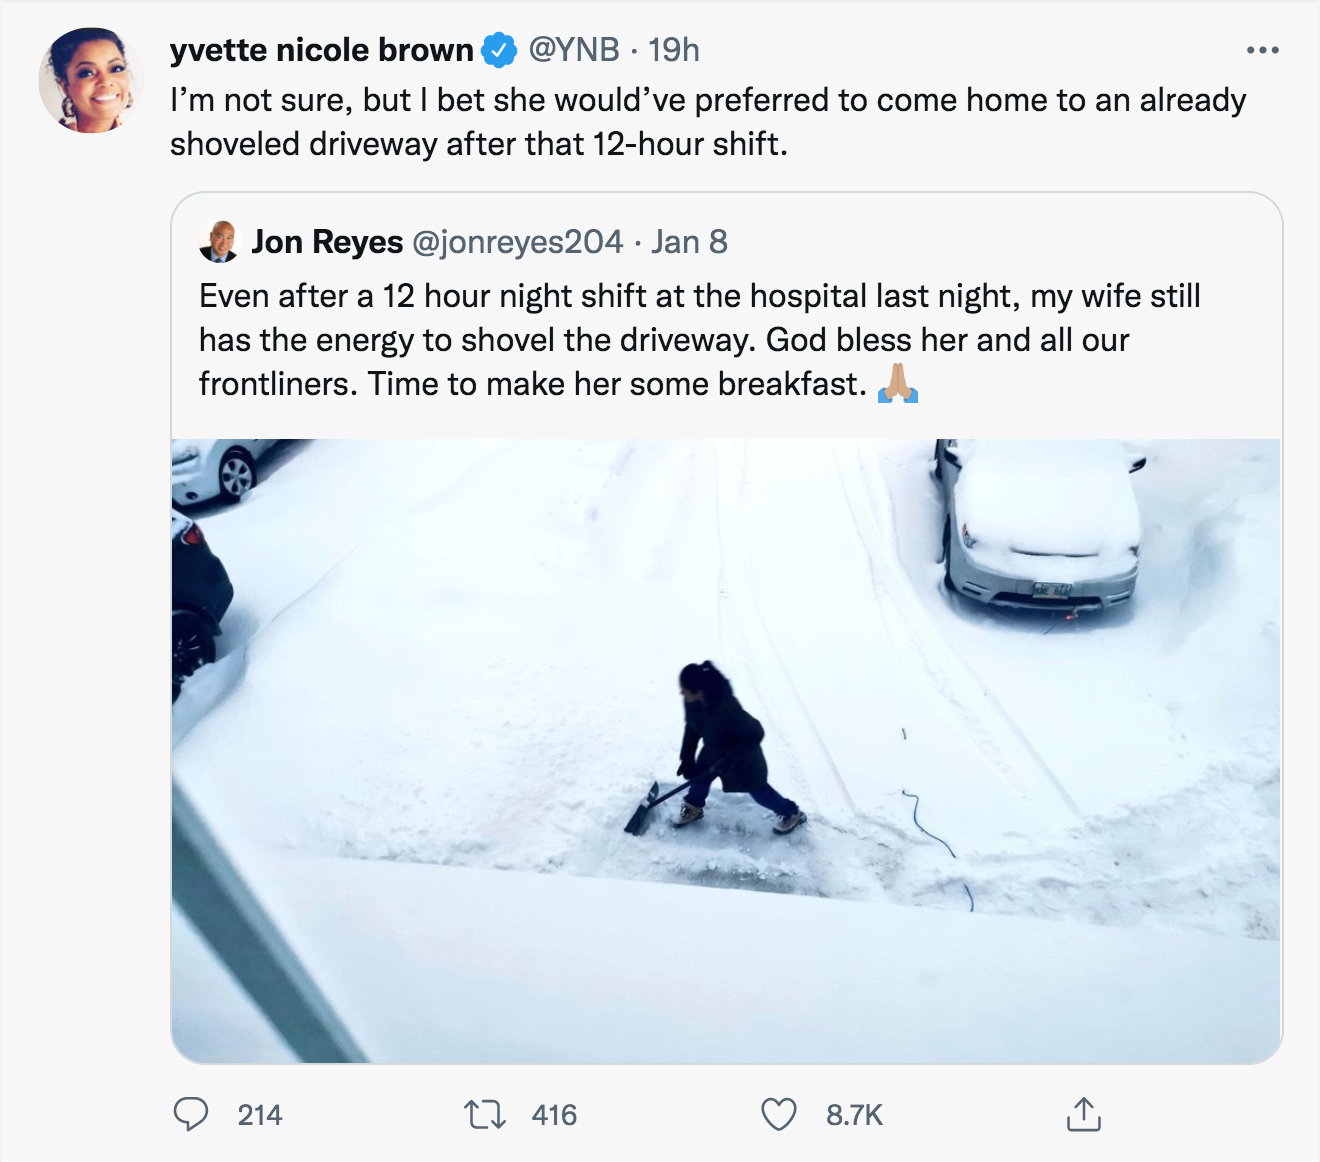 Husband Roasts For Snow Shoveling Tweet - snow - yvette nicole brown 19h I'm not sure, but I bet she would've preferred to come home to an already shoveled driveway after that 12hour shift. Jon Reyes Jan 8 Even after a 12 hour night shift at the hospital 